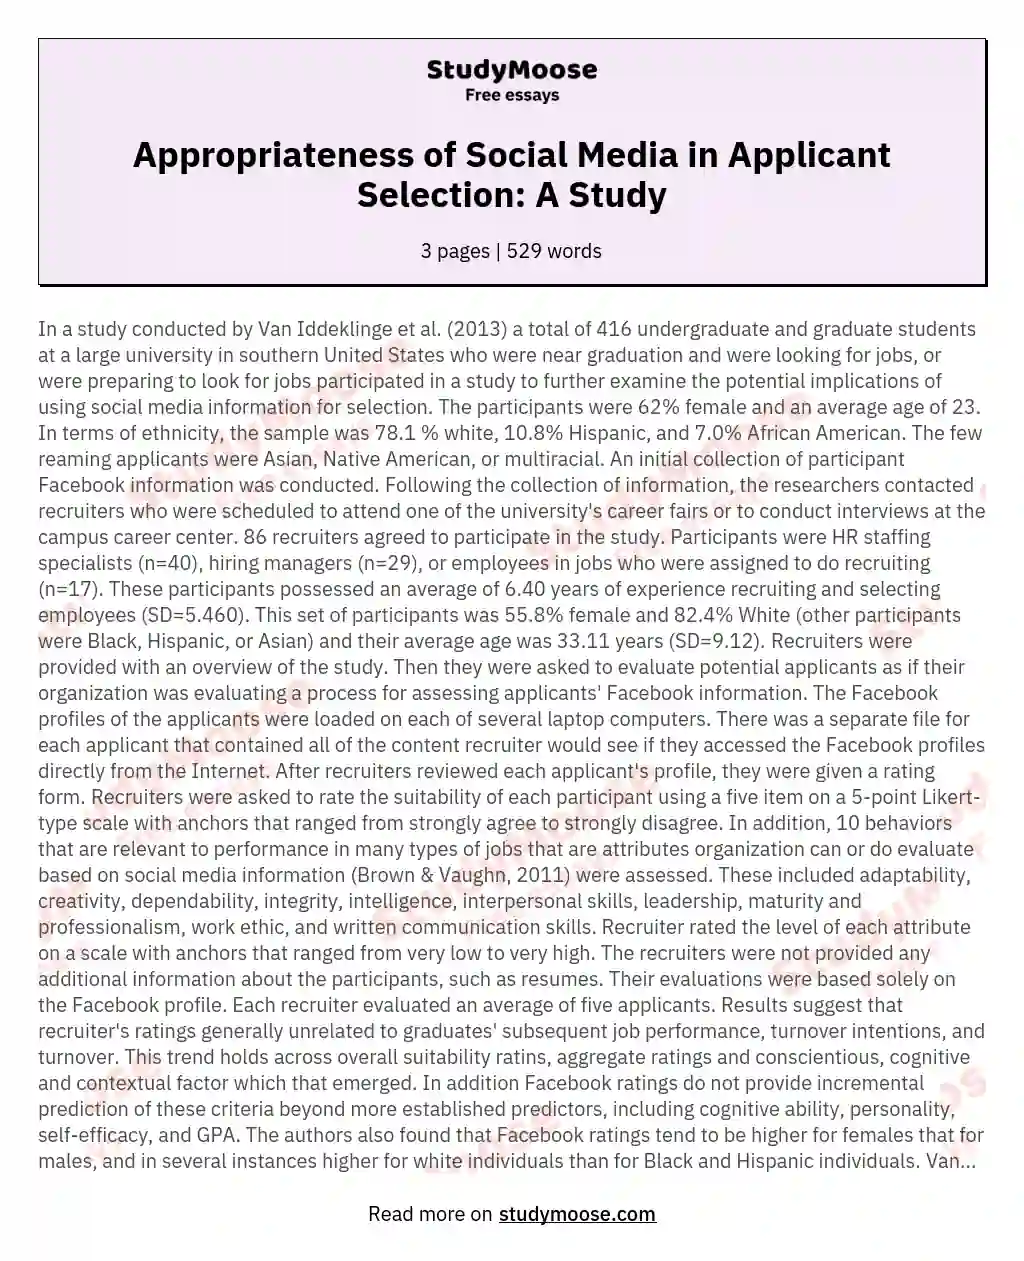 Appropriateness of Social Media in Applicant Selection: A Study essay